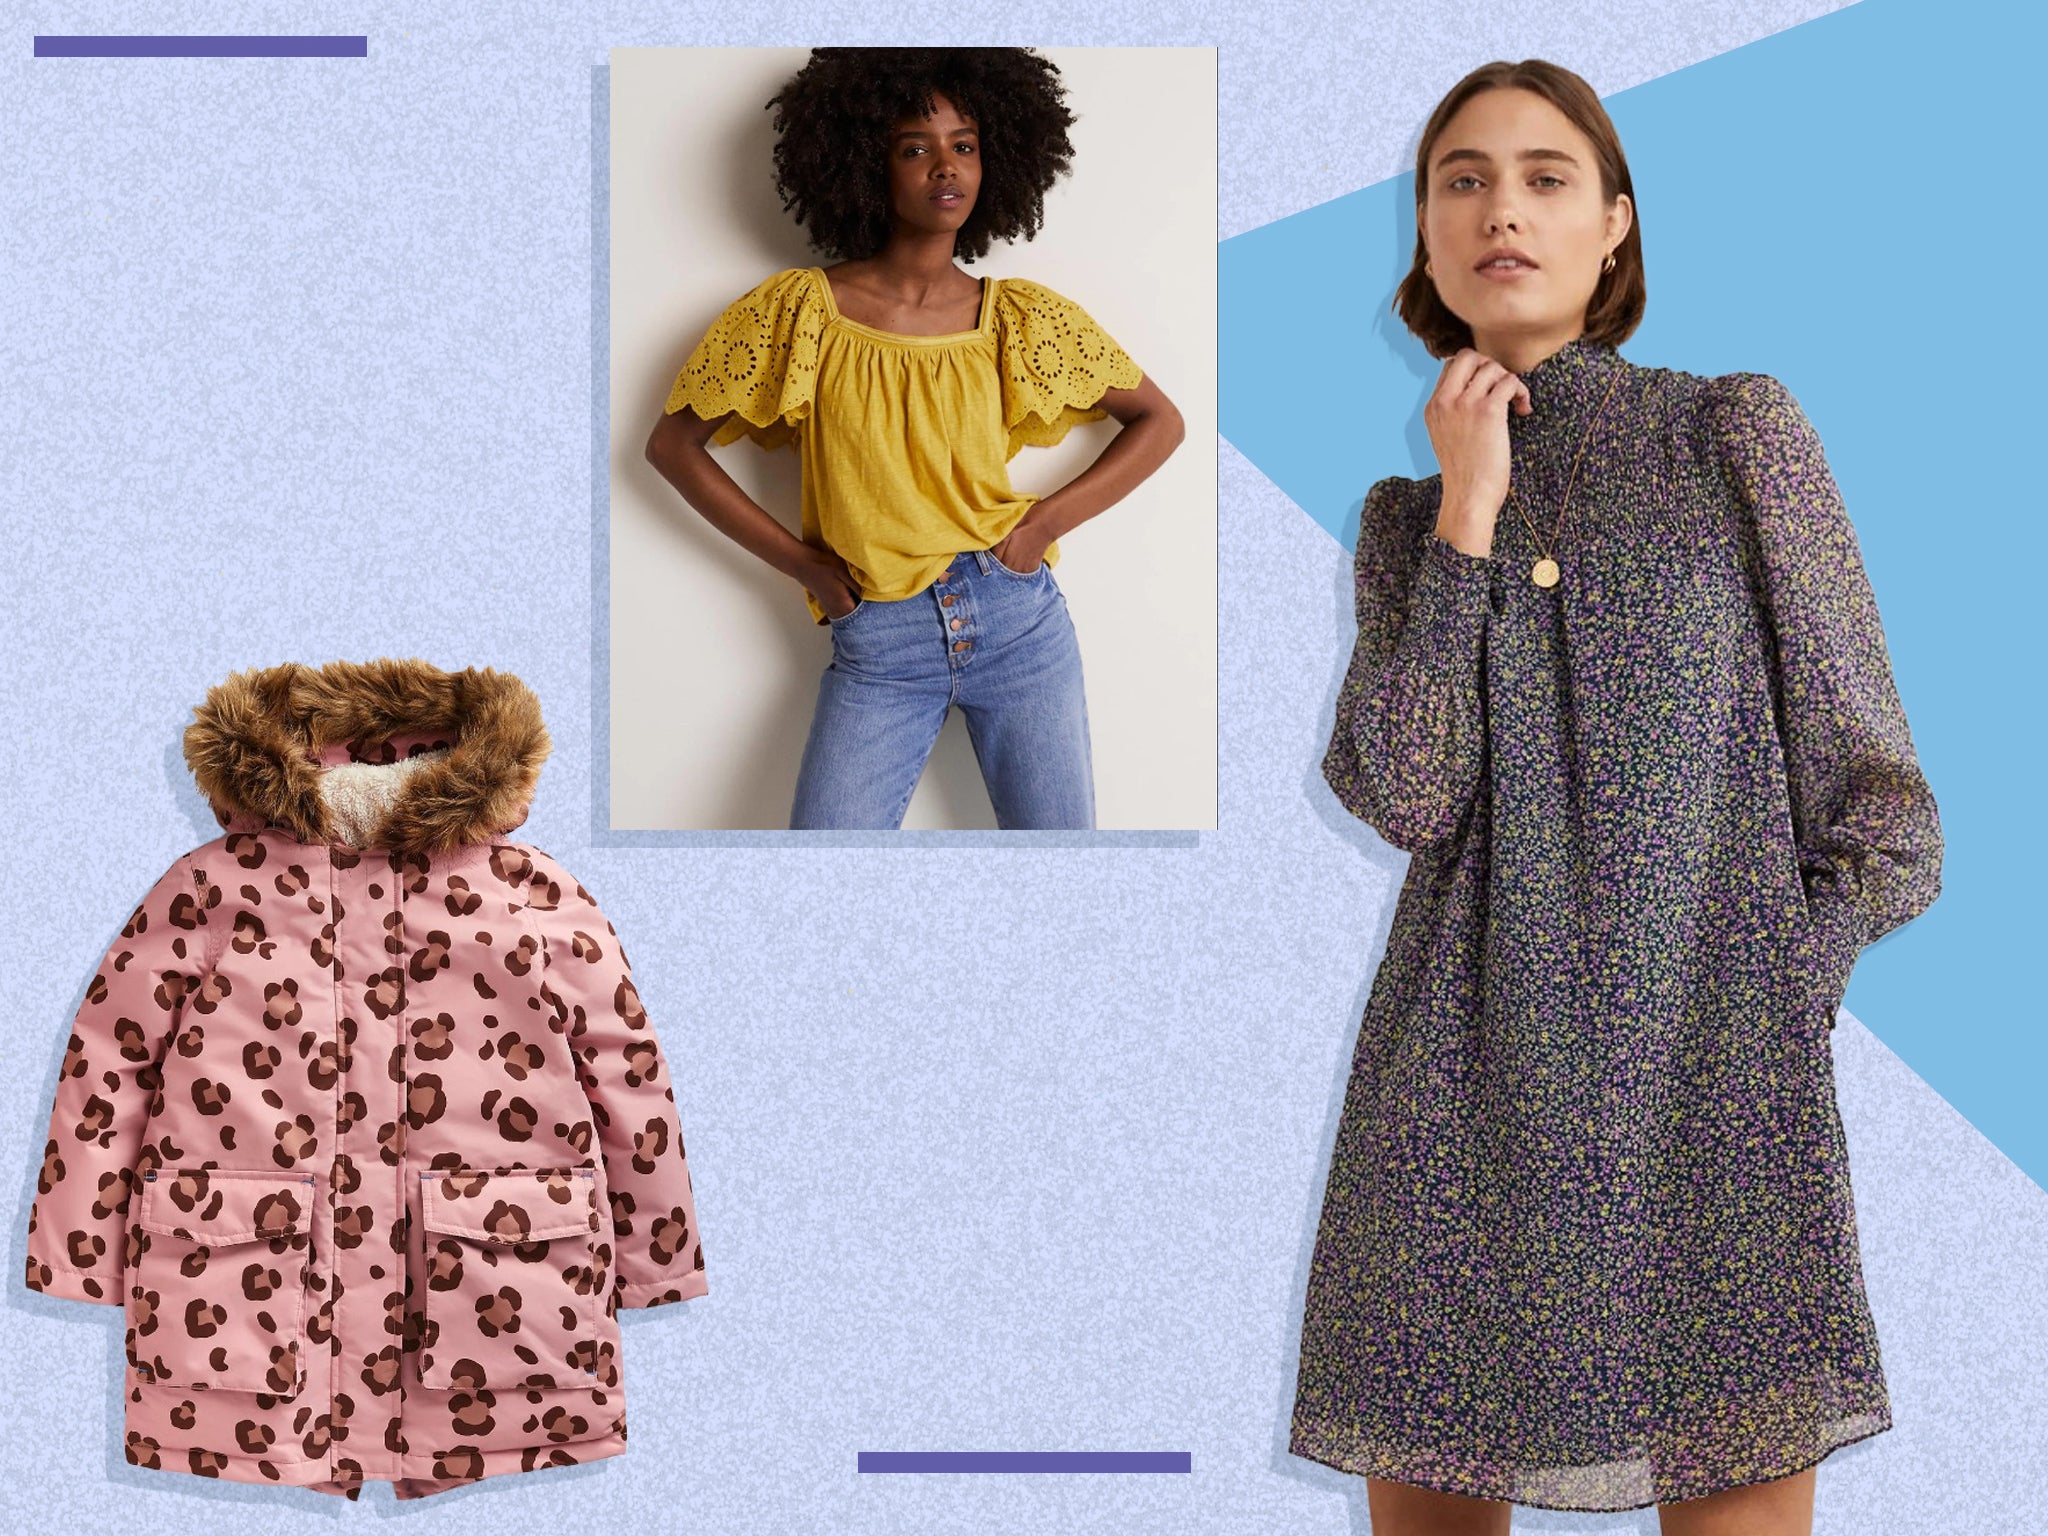 We’ve spotted womenswear and kids’ clothing buys